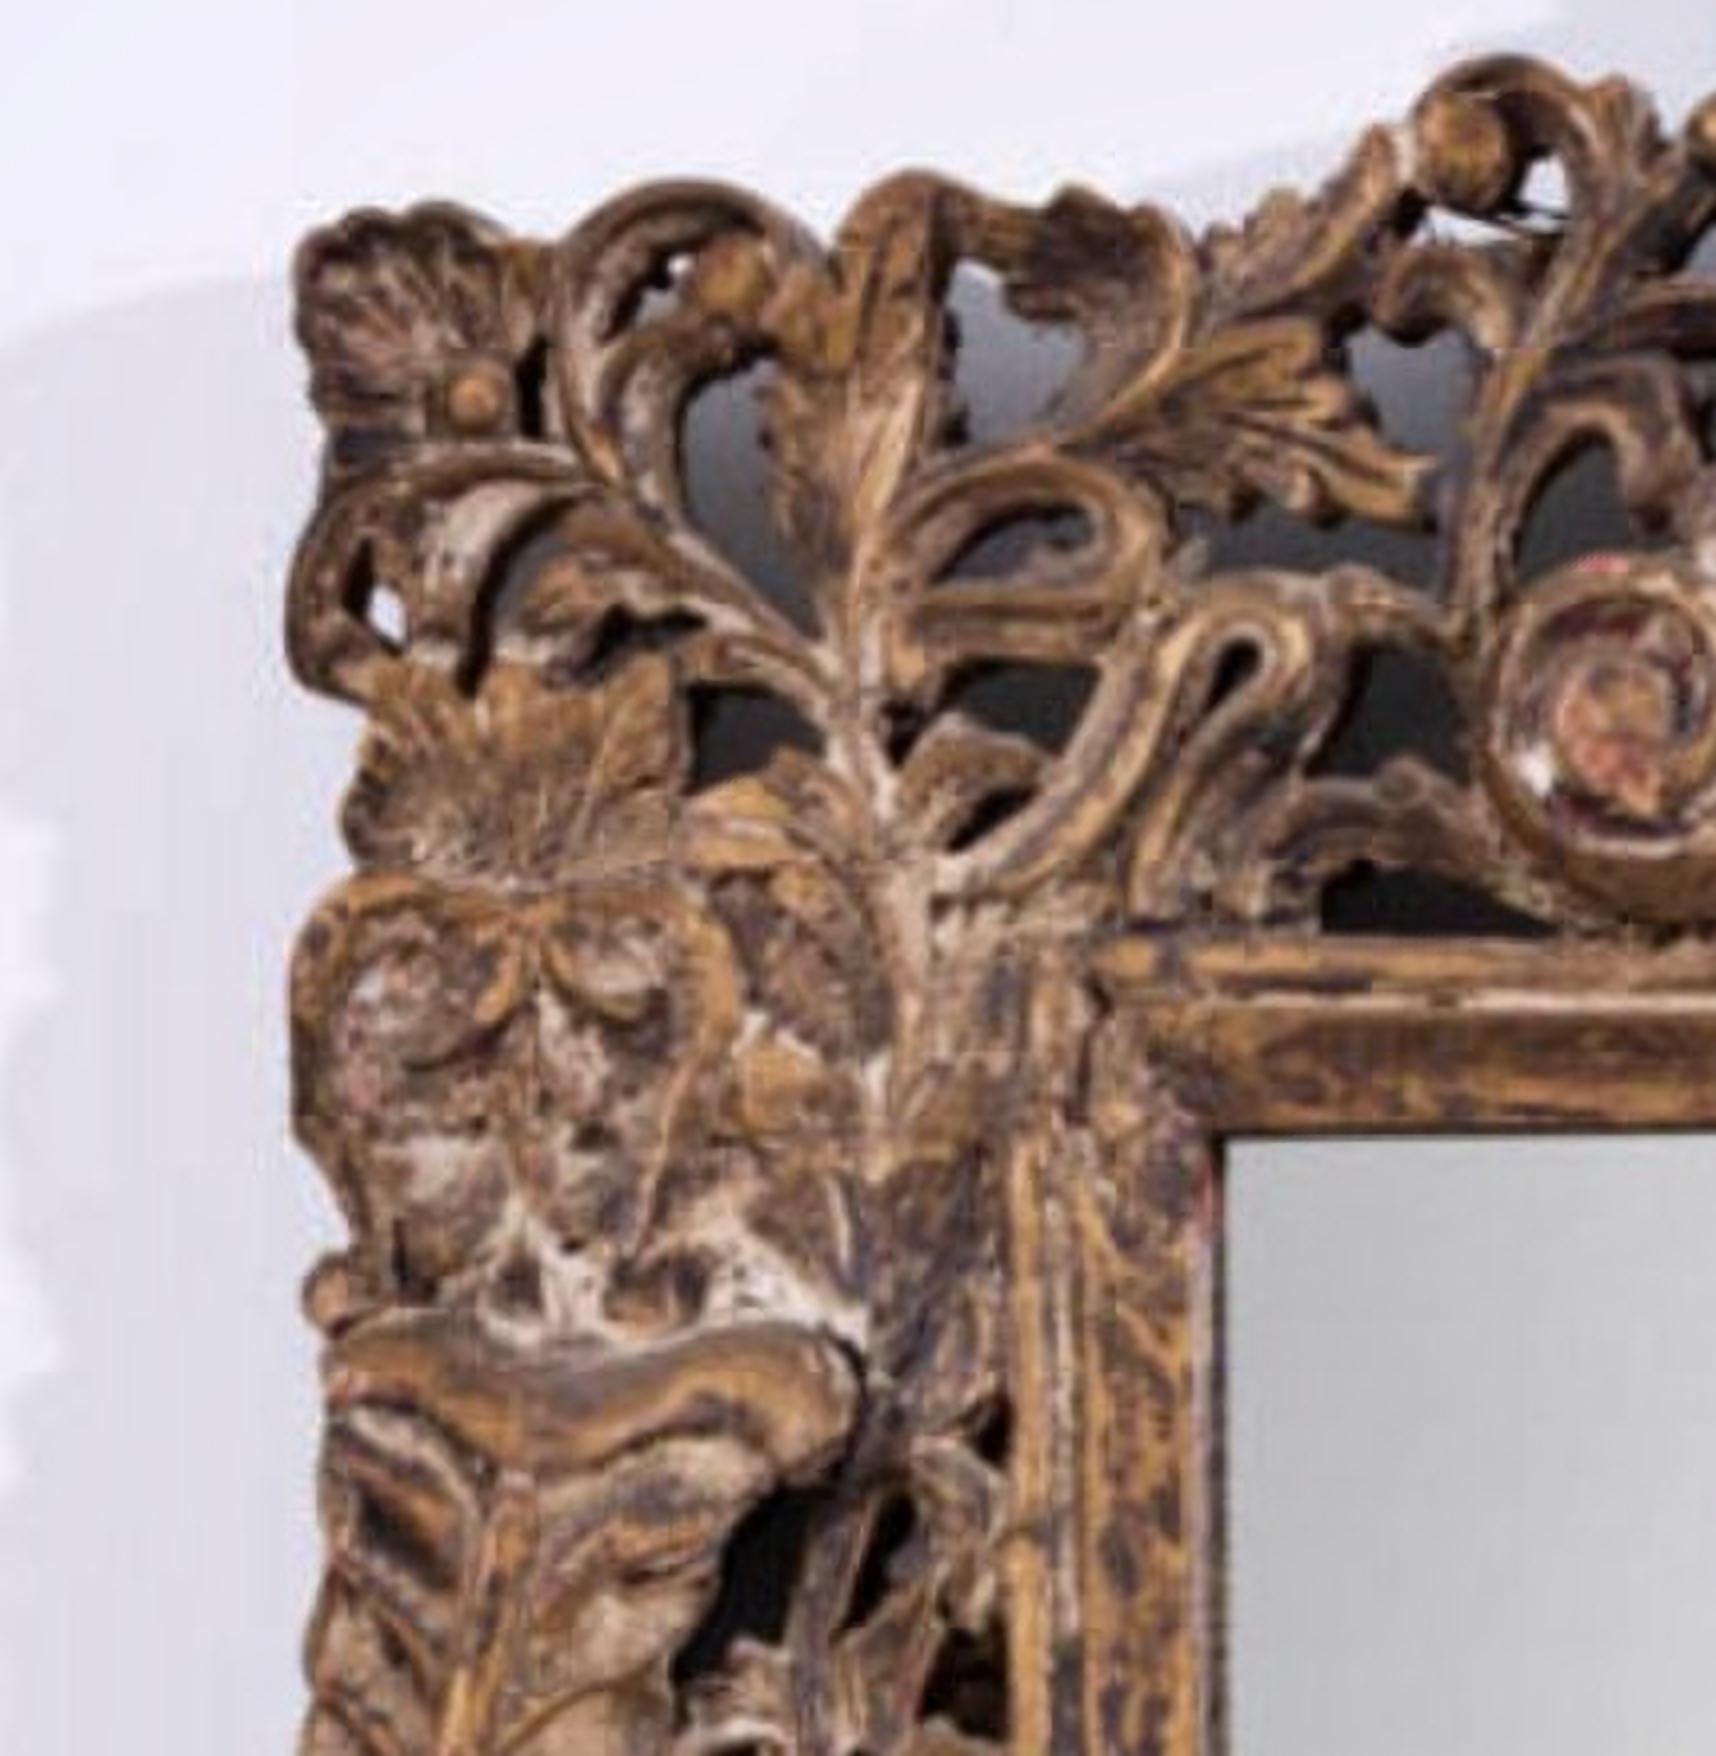 Italian mrror 18th century
Carved and painted wooden frame with vegetal elements. Small flaws and defects.
Dim.: 90x60 cm.
Good conditions.